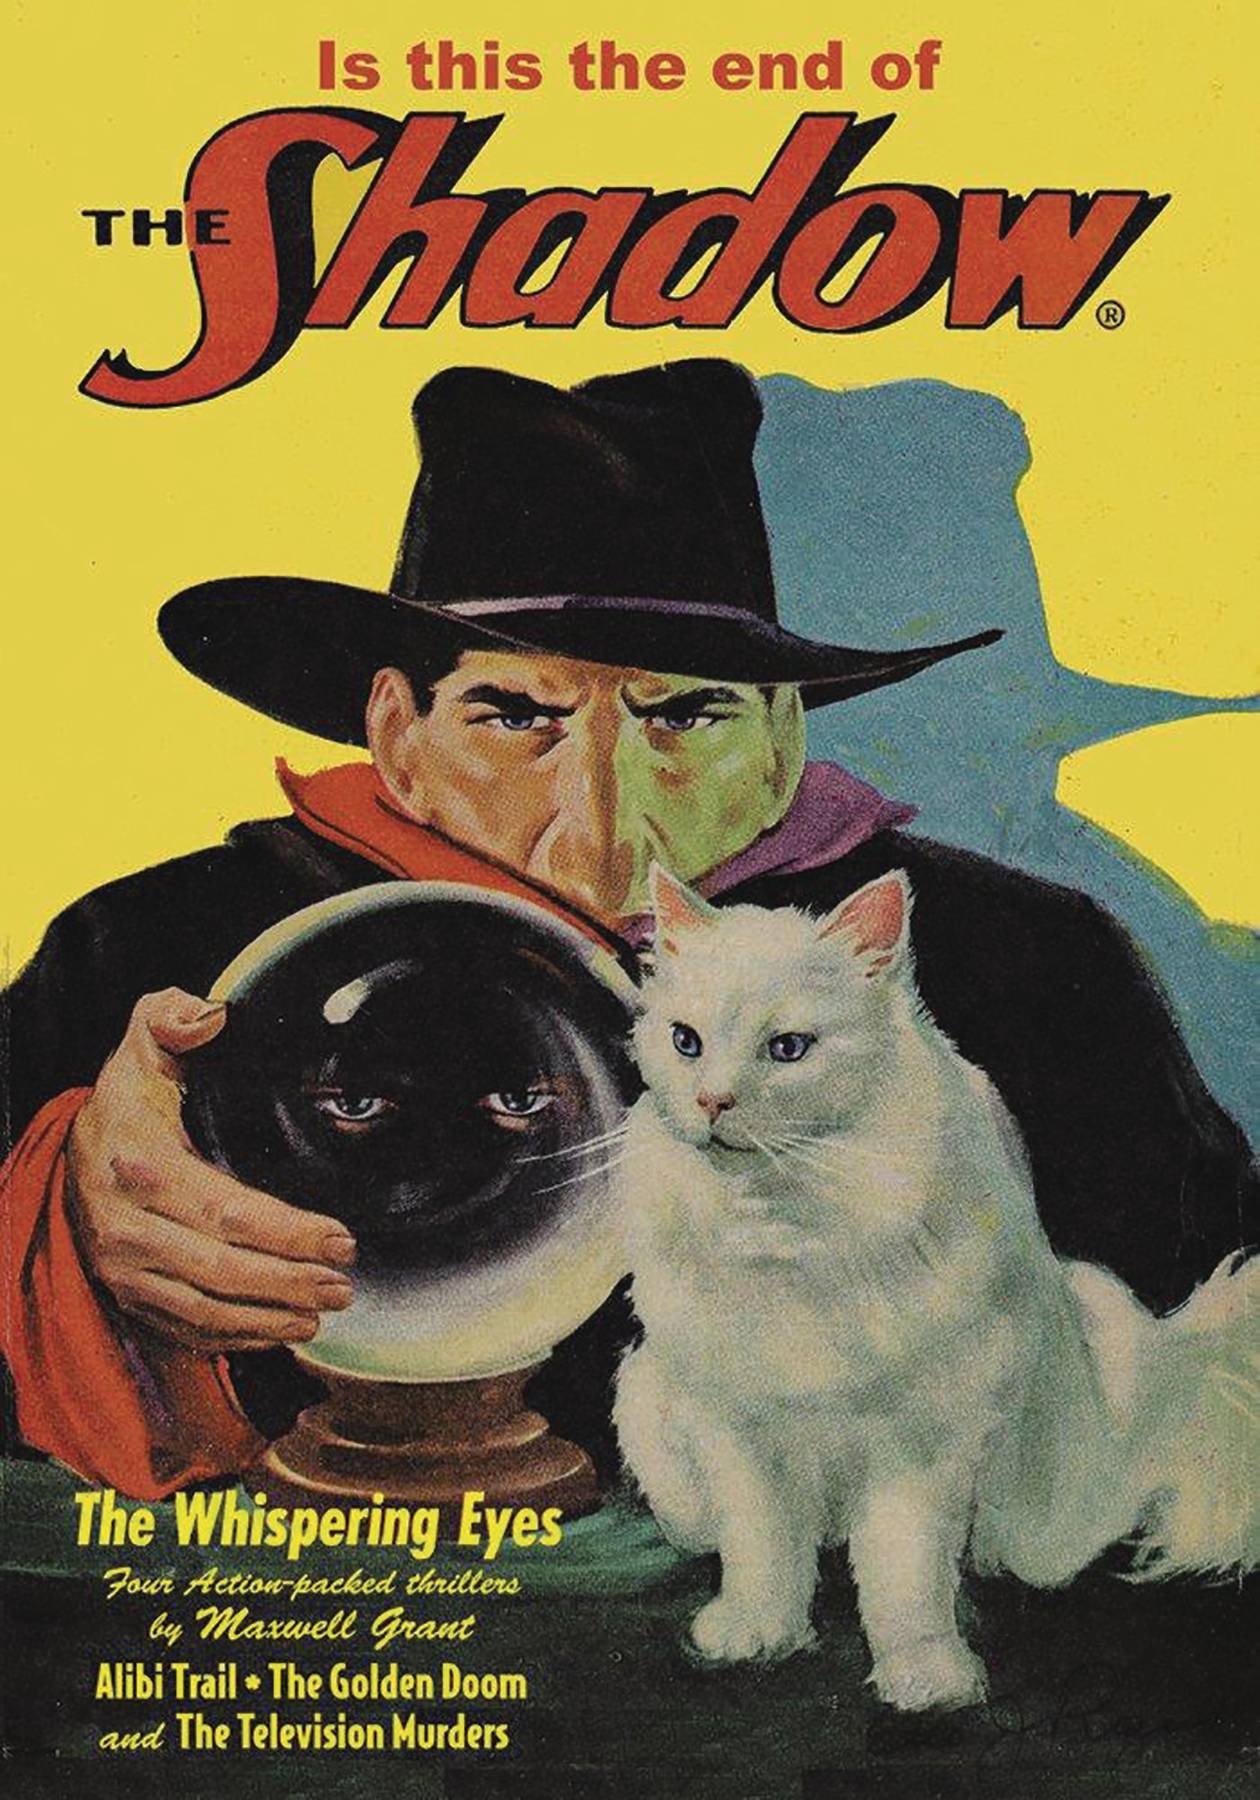 SHADOW NOVEL SC VOL 151 (OF 151) FINAL ISSUE SPECTACULAR